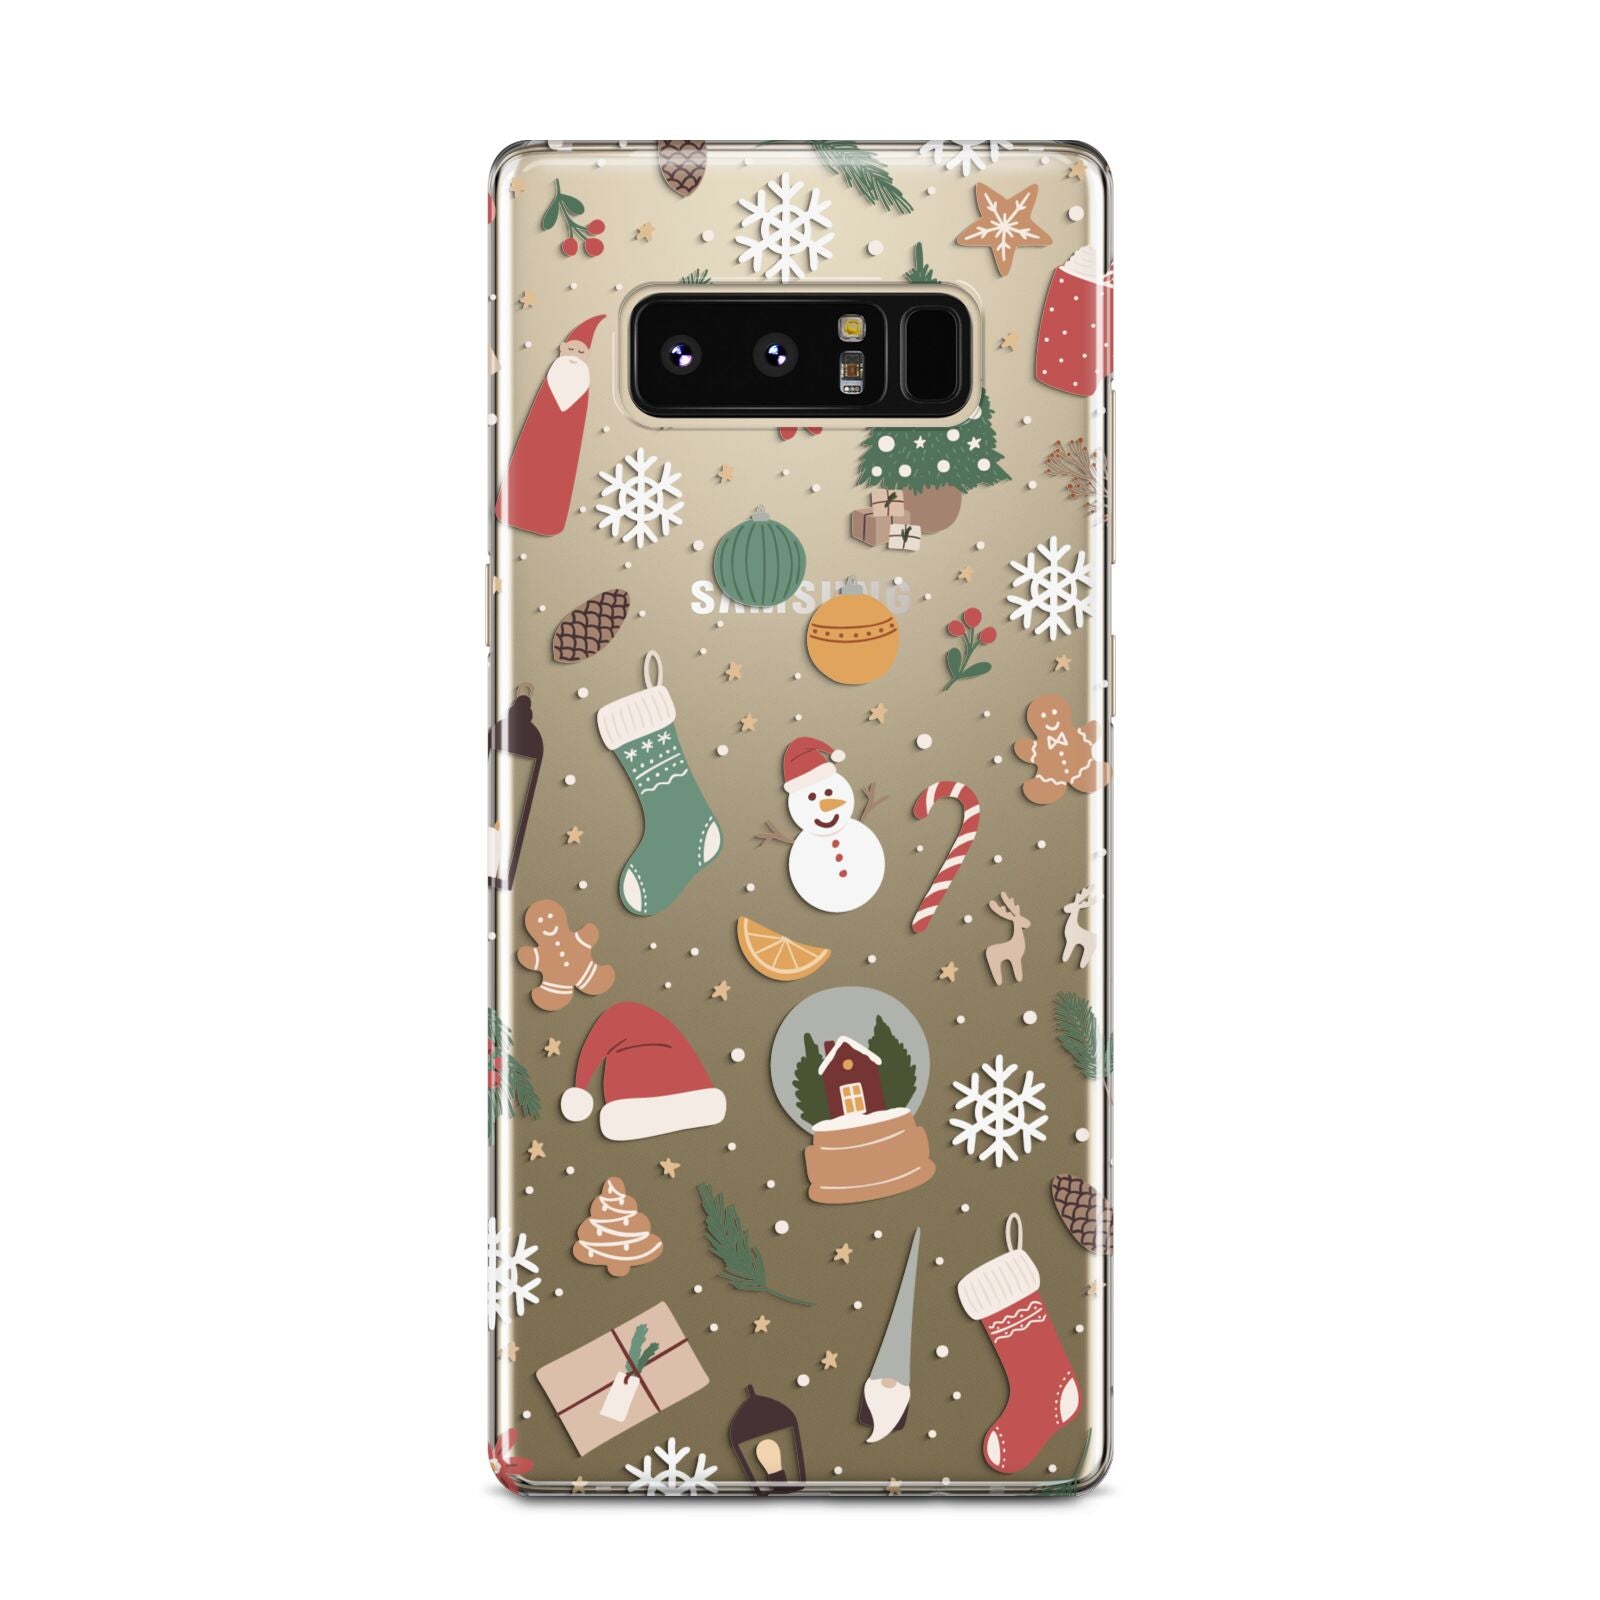 Christmas Assortments Samsung Galaxy Note 8 Case